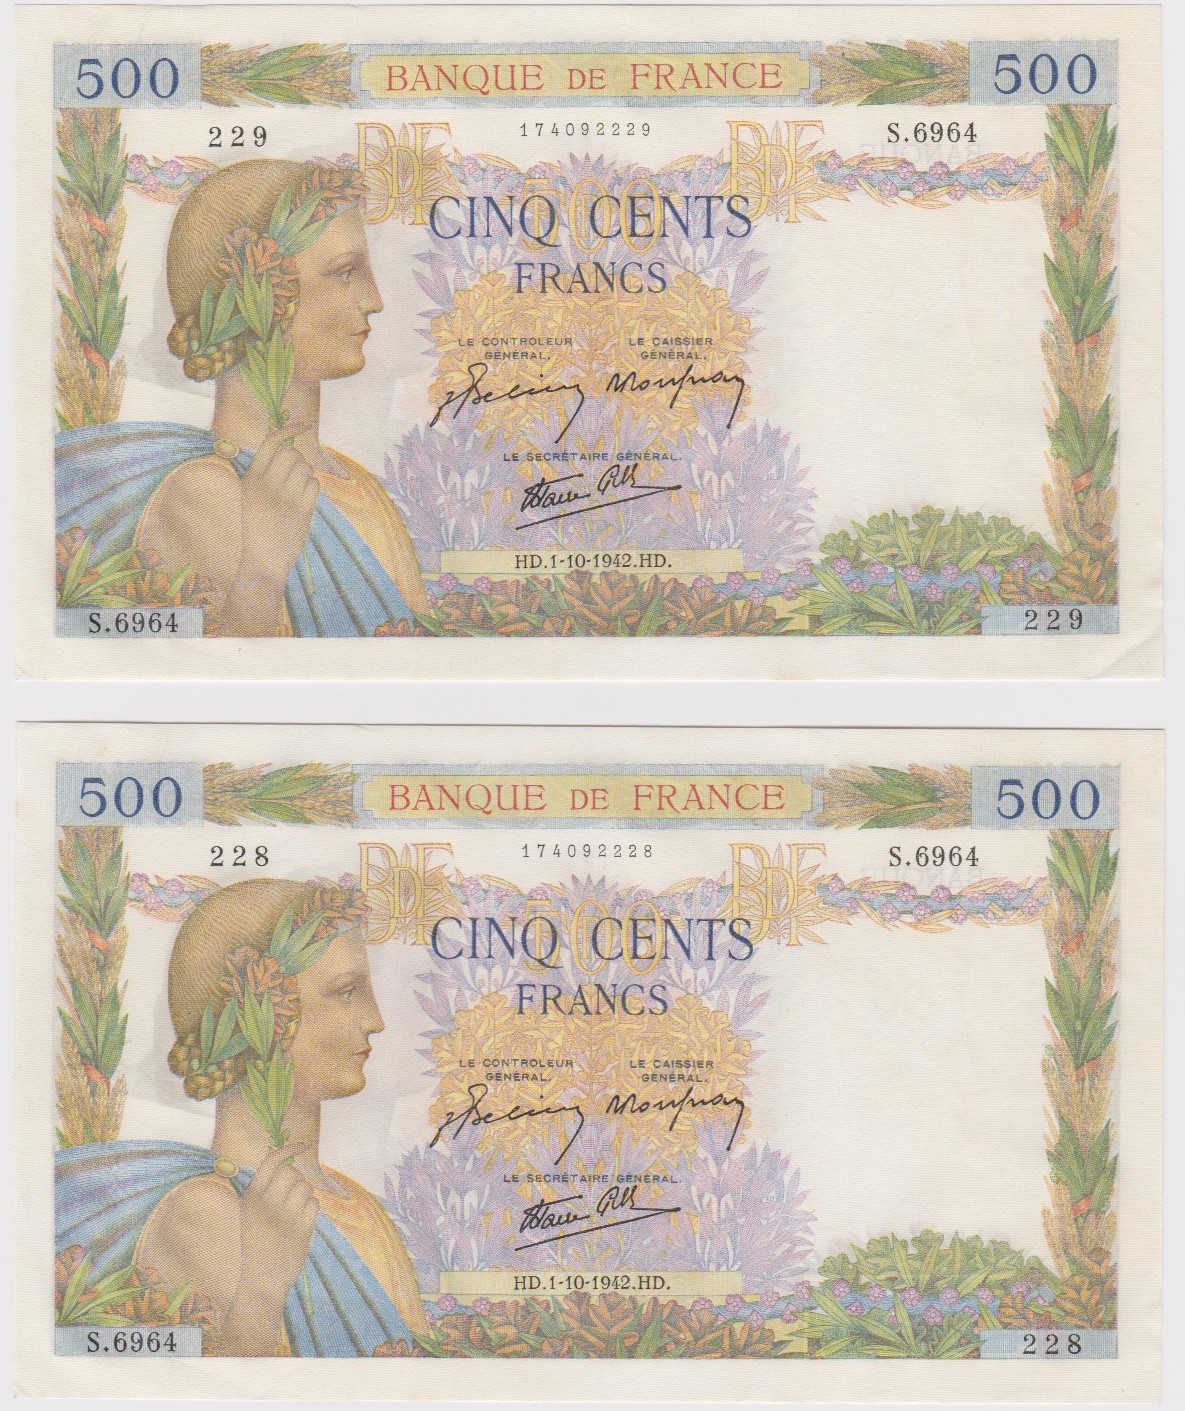 France 500 Francs (2) dated 1st October 1942, a consecutively numbered pair, serial S.6964 228 & S.